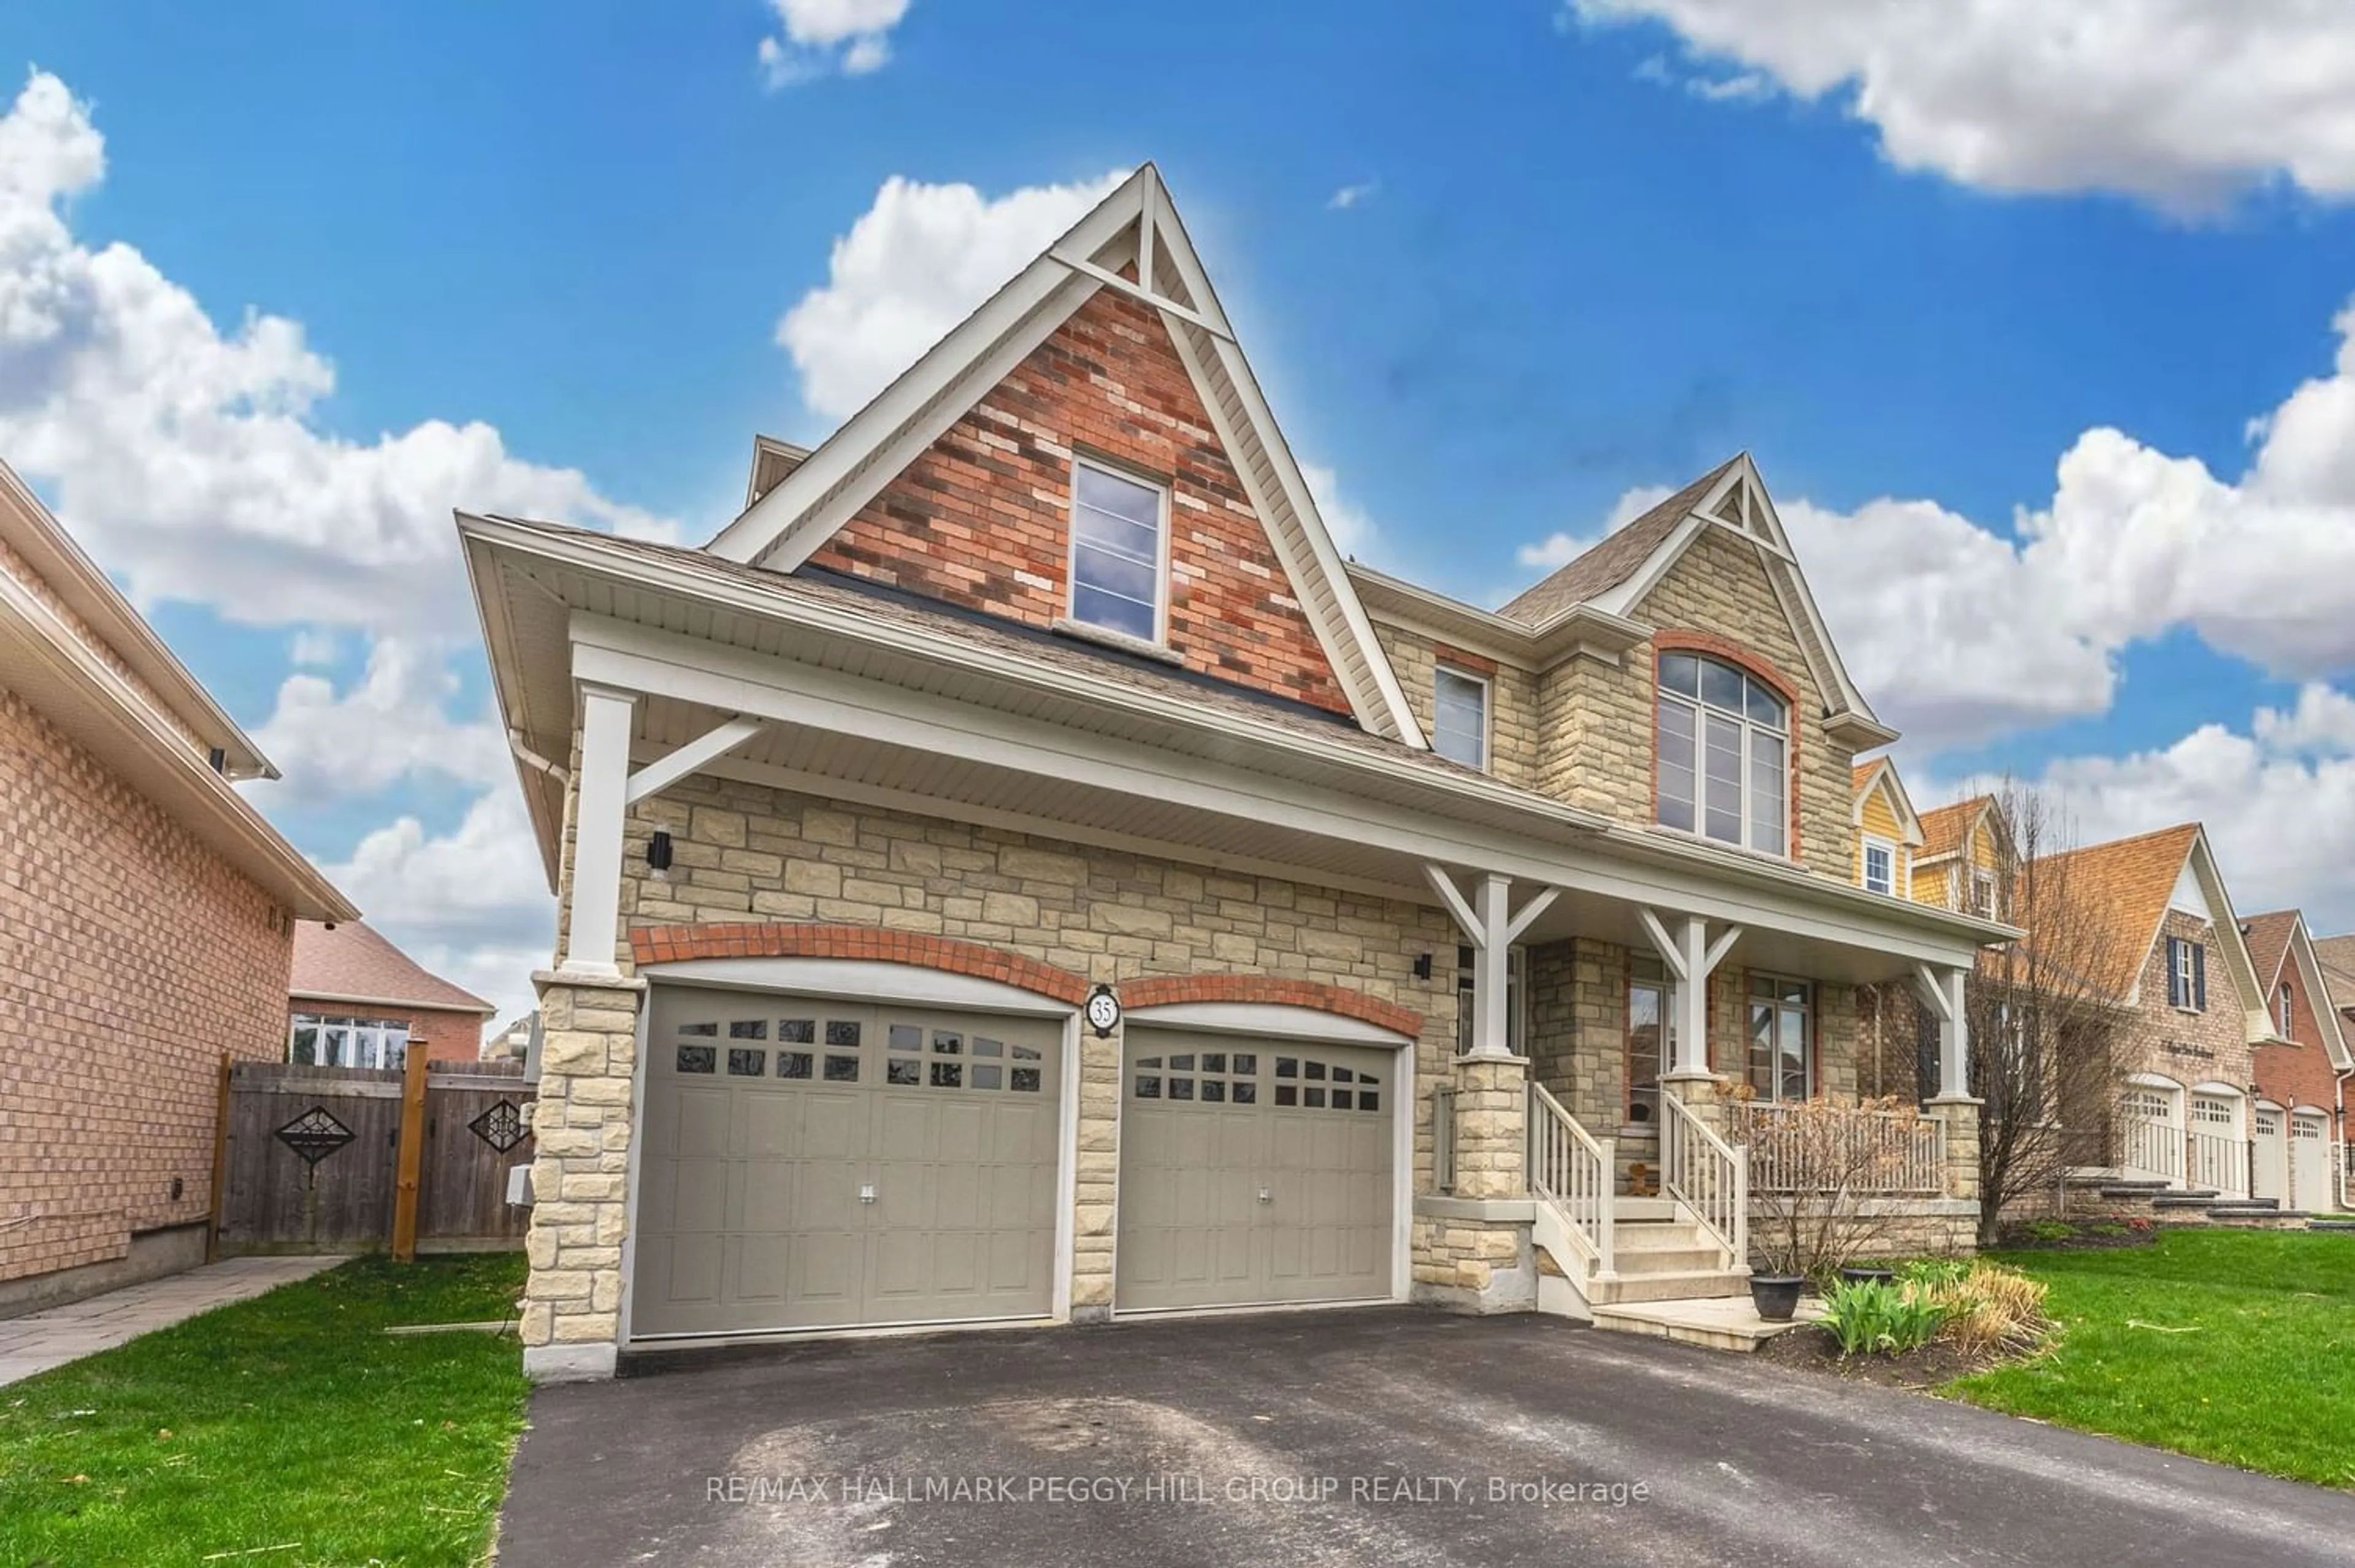 Home with brick exterior material for 35 Royal Park Blvd, Barrie Ontario L4N 6M8